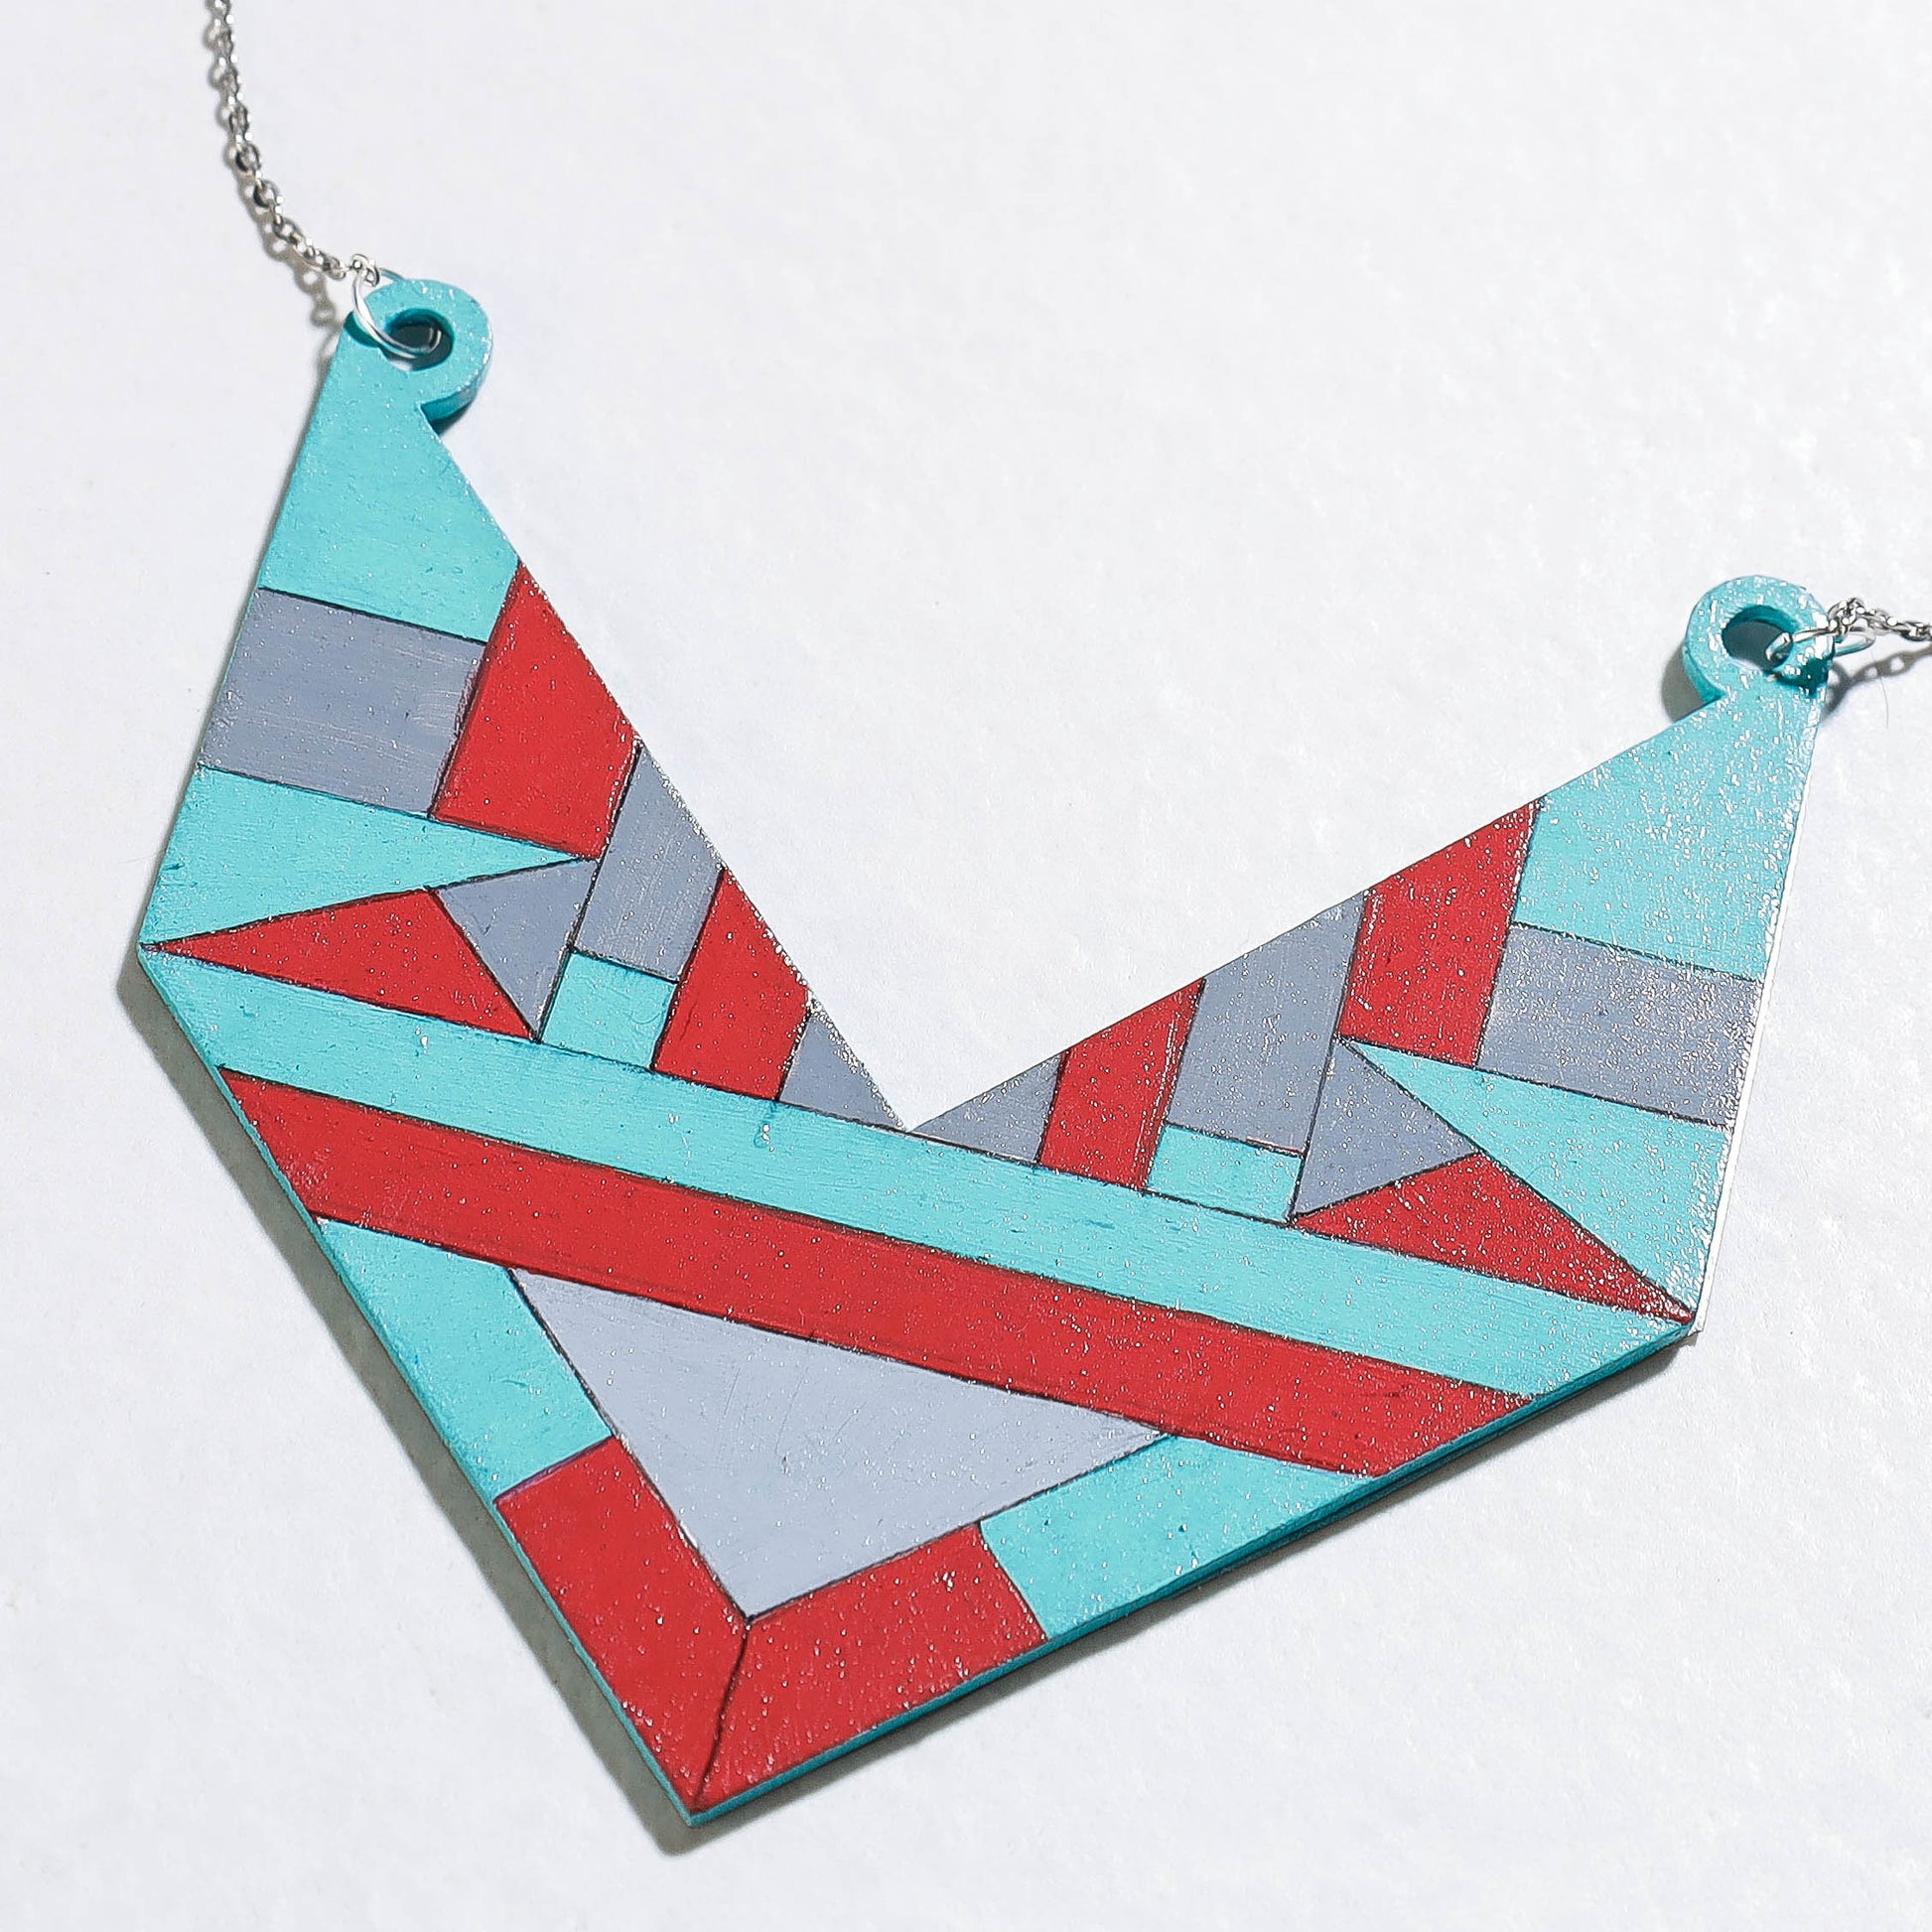 handpainted wooden necklace